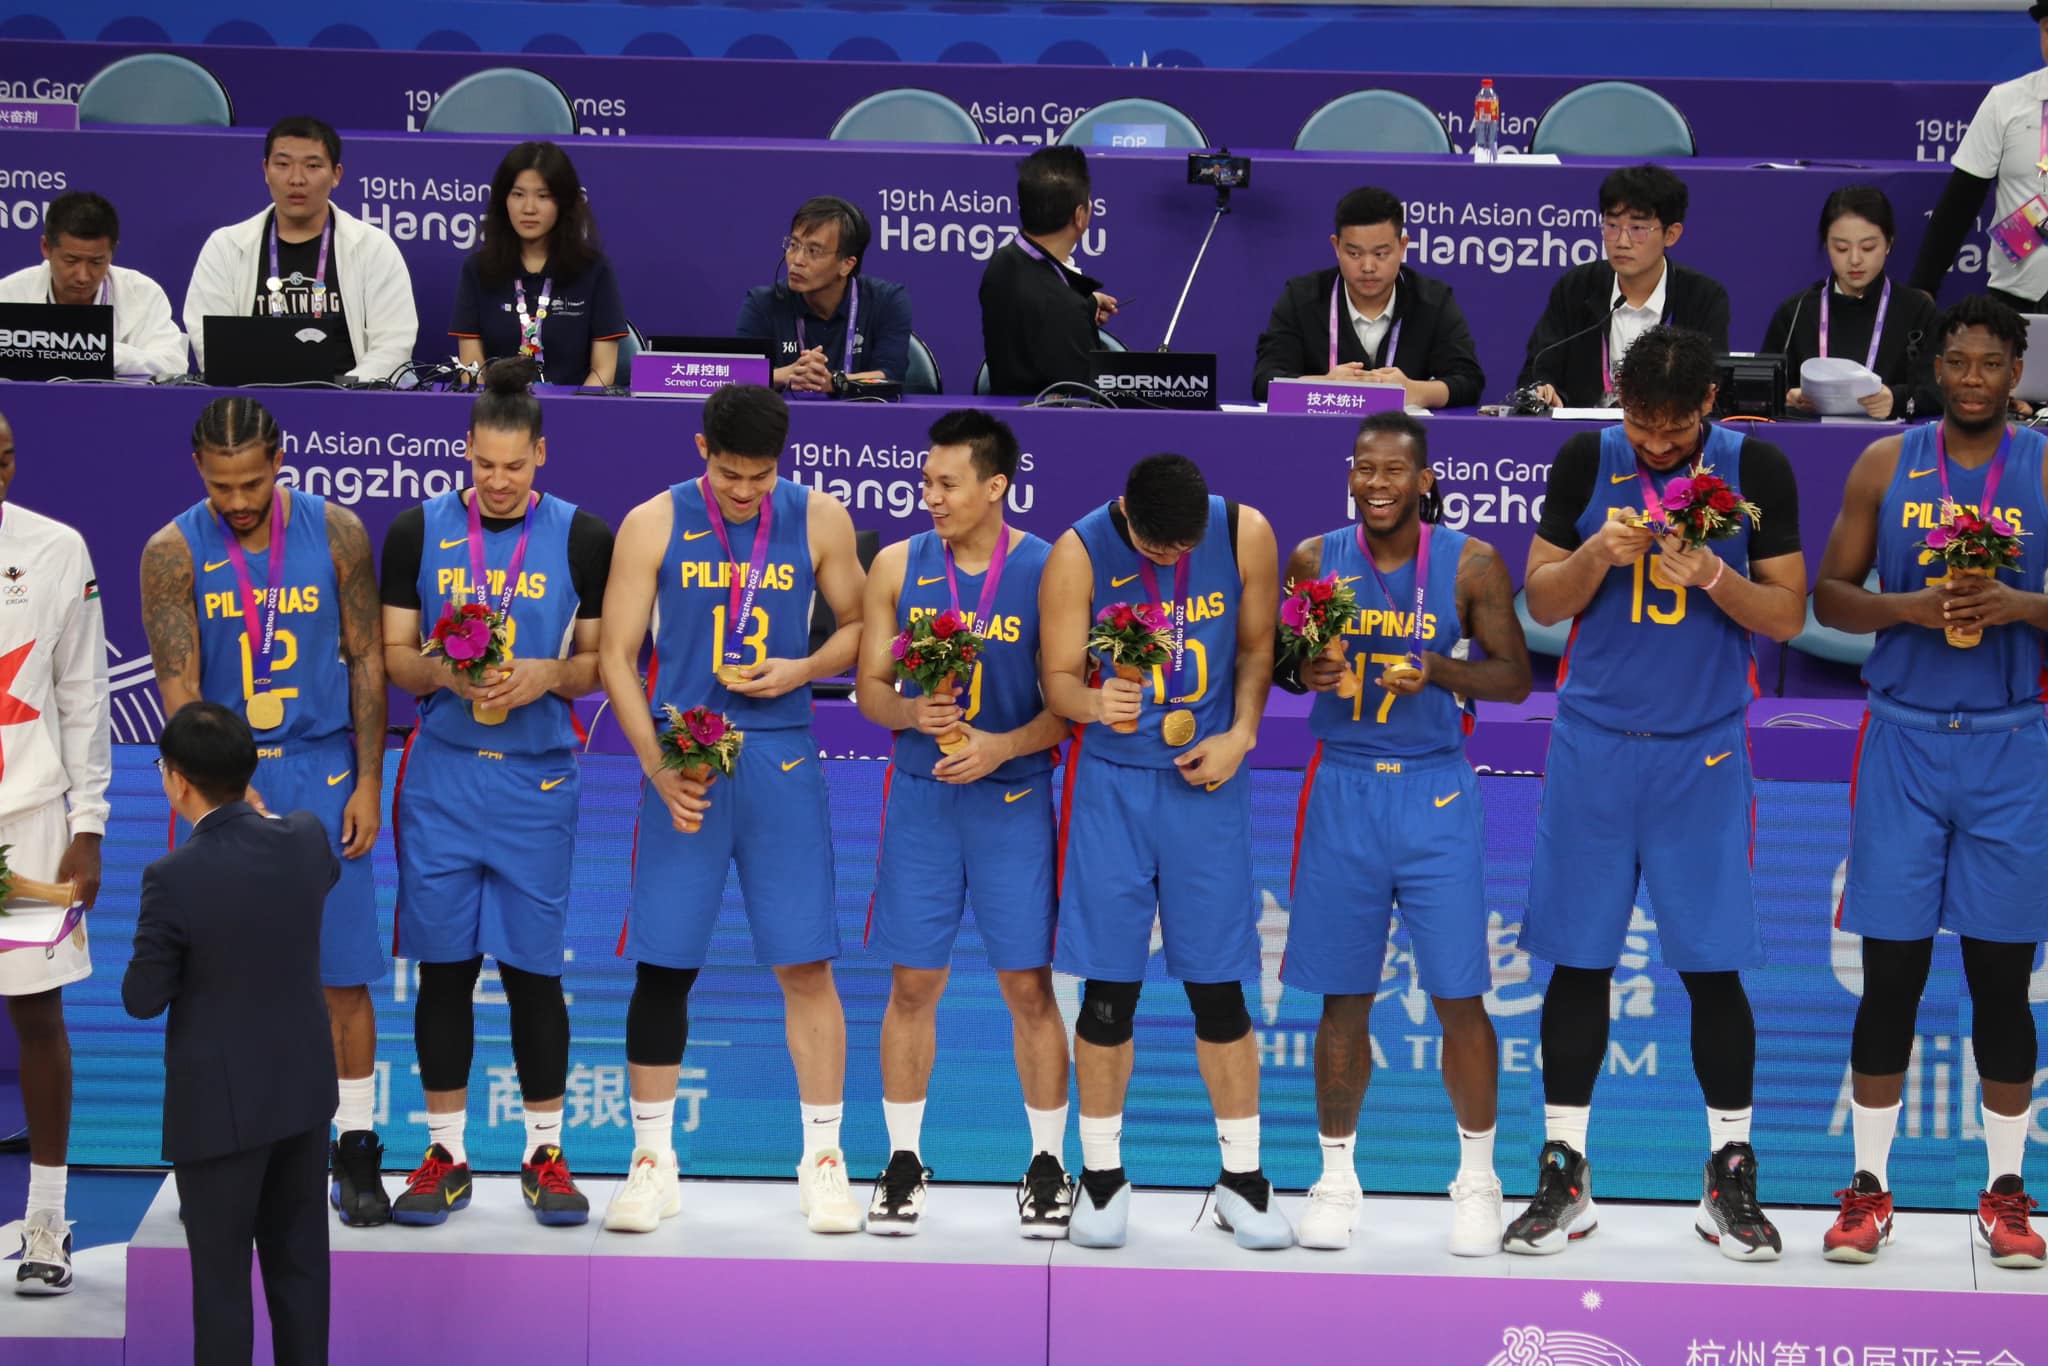 Gilas Pilipinas win the gold medal of the men's basketball tournament in the 19th Asian Games 